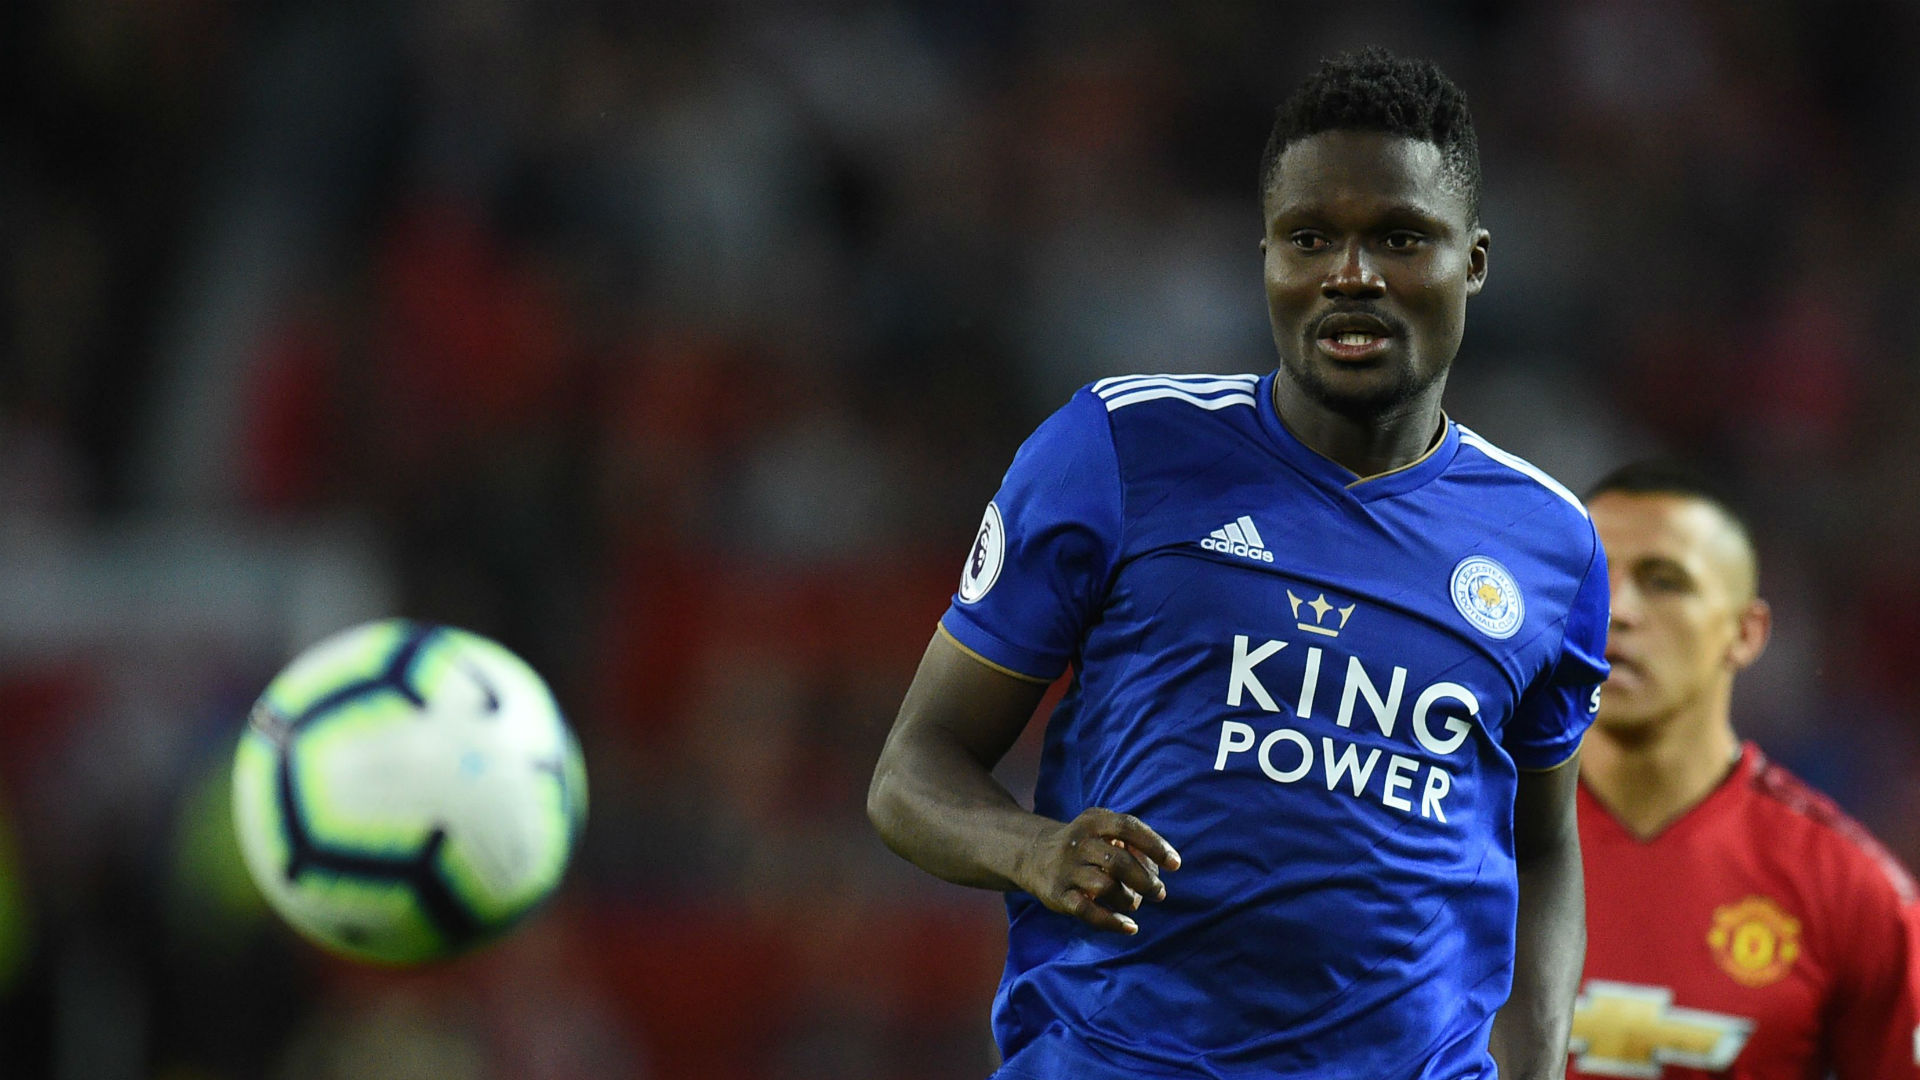 Nigeria captain Musa sheds light on woes of former Leicester City teammate Amartey 